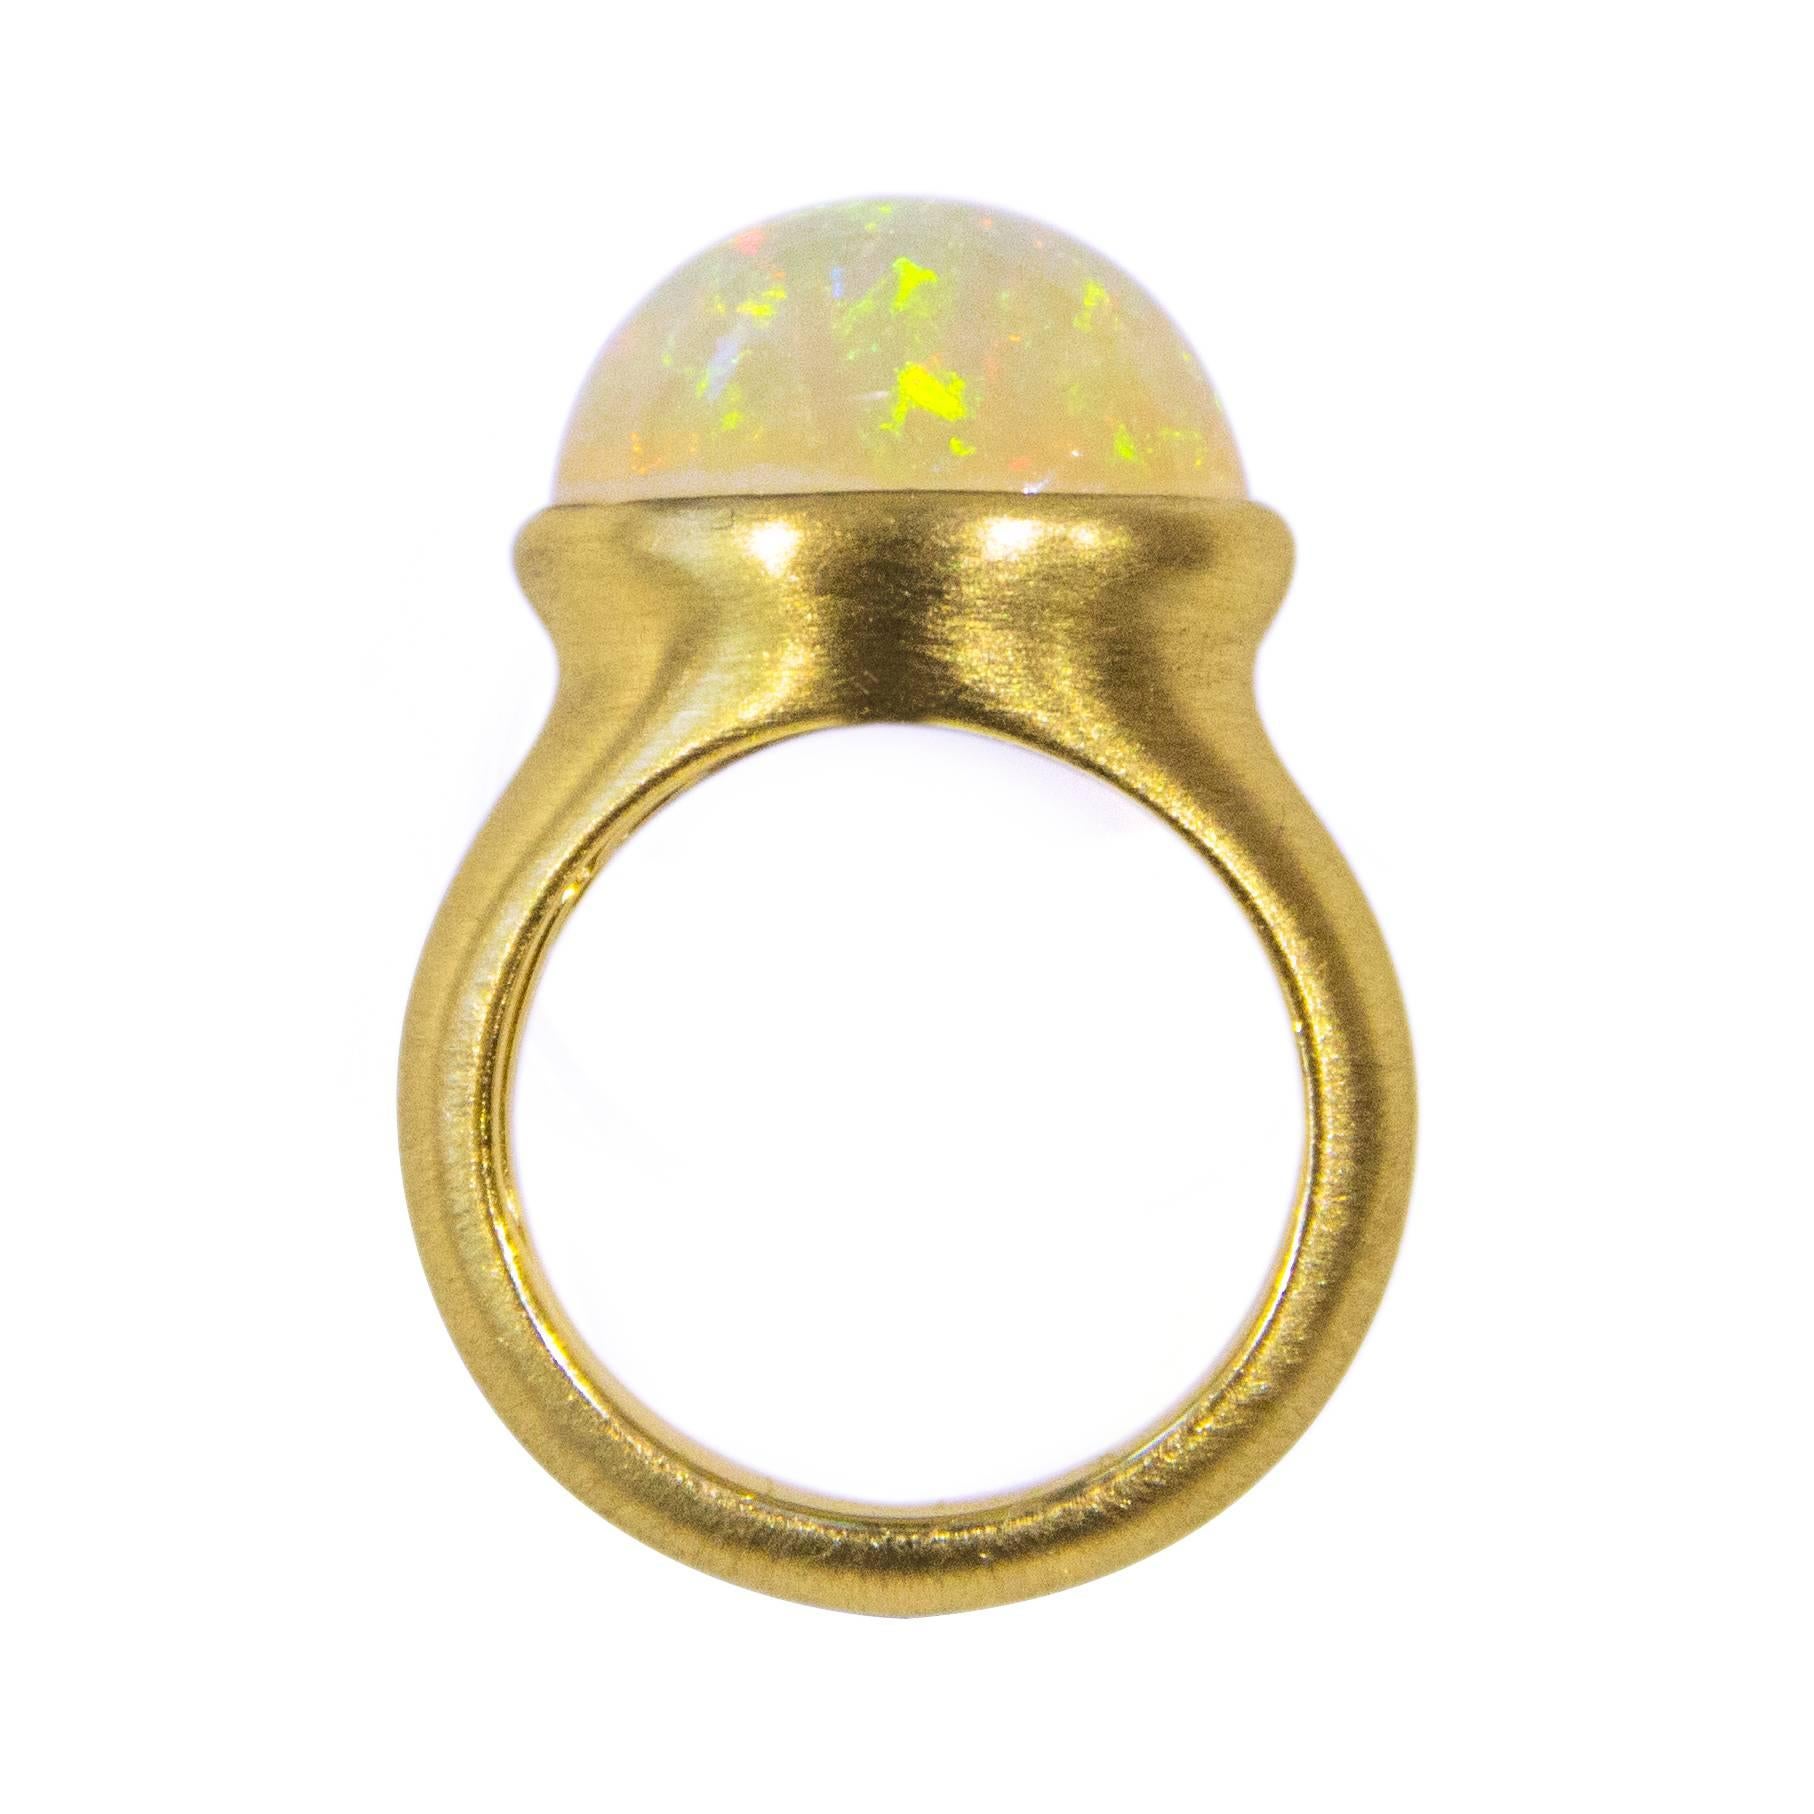 Jona design collection, hand crafted in Italy, 18 karat brushed yellow gold ring, set with a 6.25 carats cabochon arlequin opal (0.67 x 0.52 in.). US size 6.5, EU size 13. It can be sized to any specification.
All Jona jewelry is new and has never